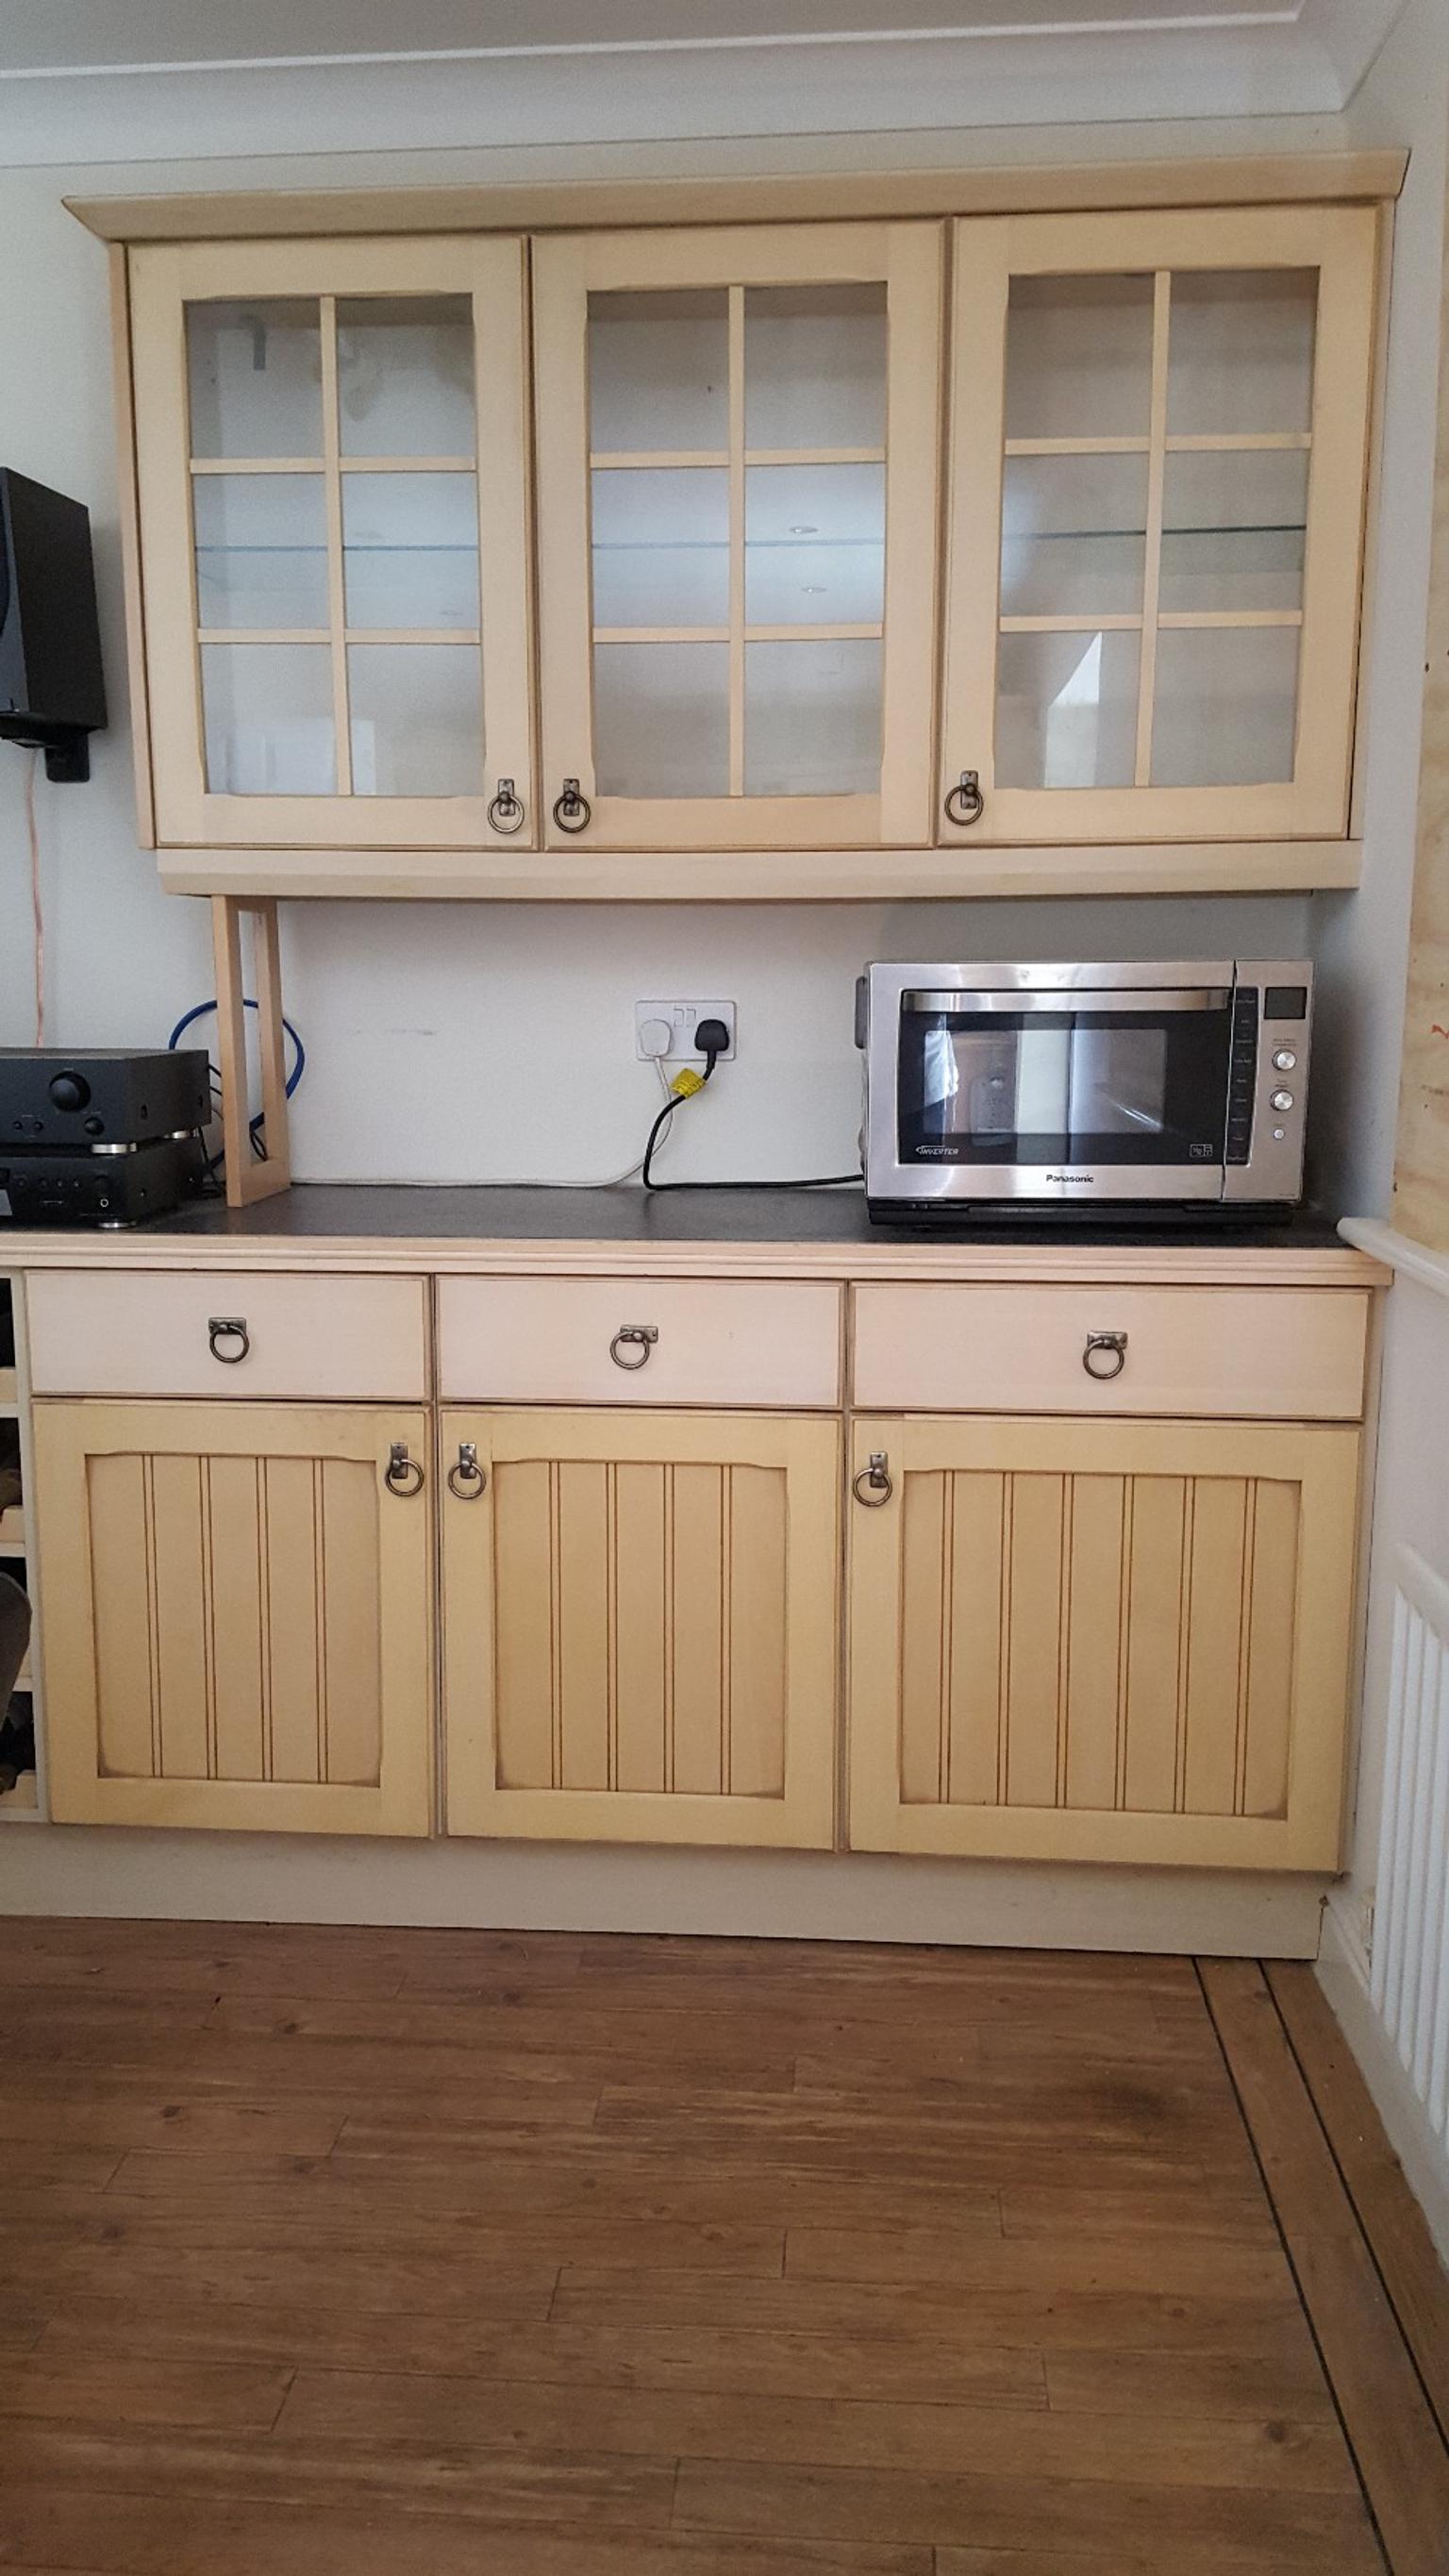 Kitchen Cabinets Units Used In Cv22 Rugby For 295 00 For Sale